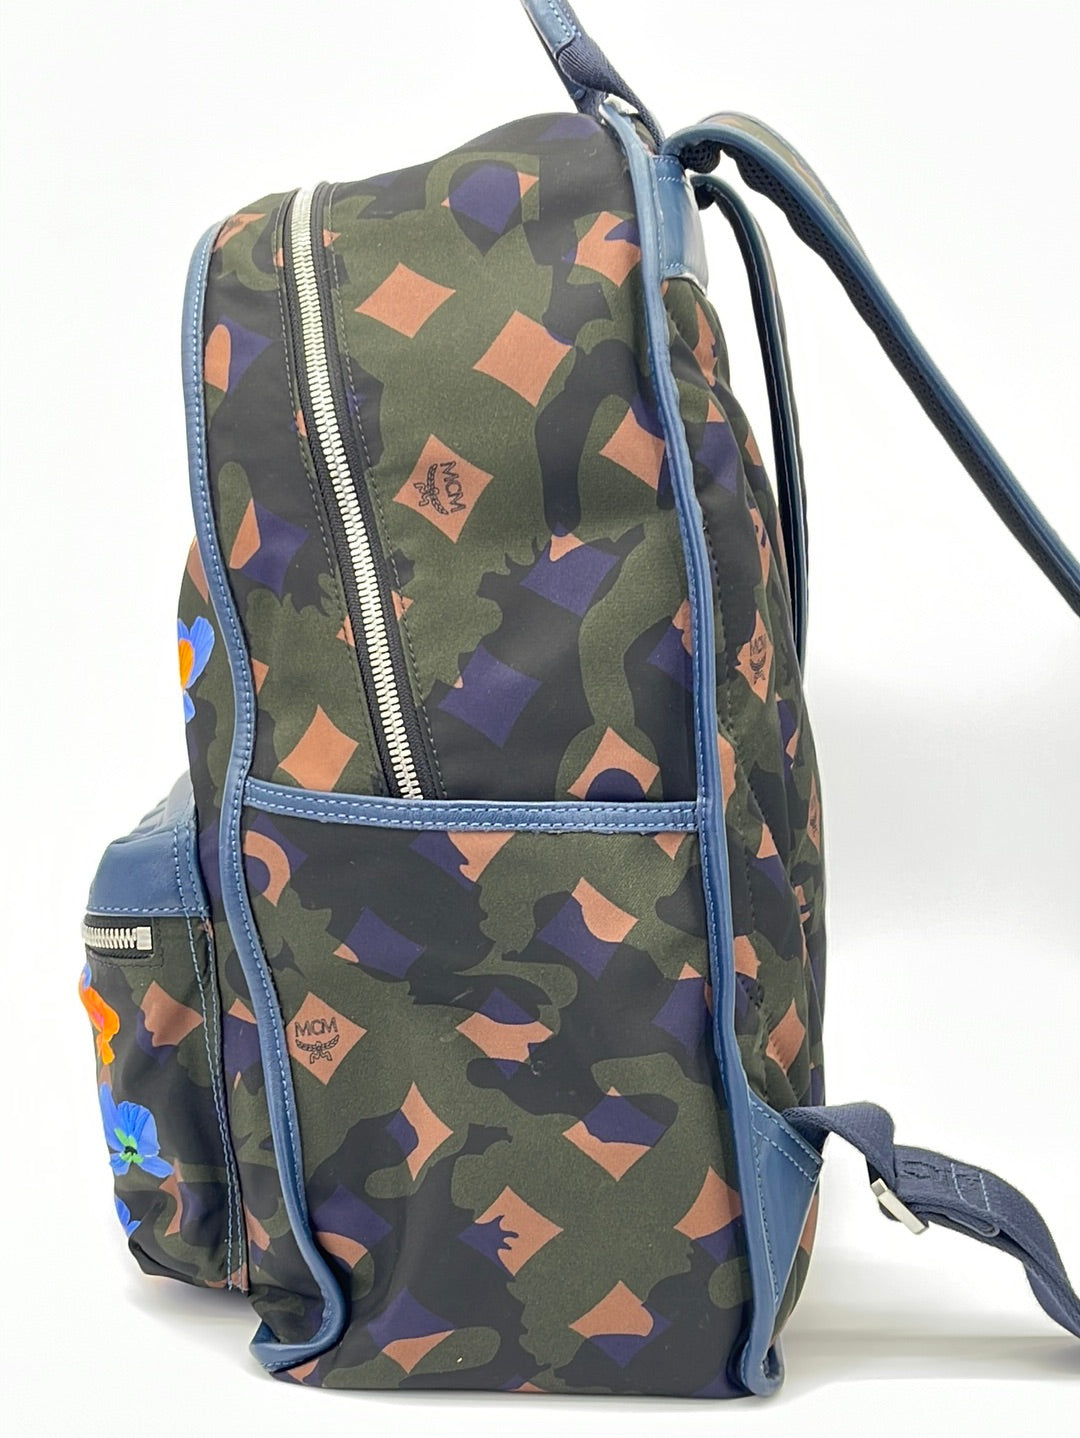 Unisex Pre-Owned Authenticated MCM Camo Dieter Munich Lion Backpack Nylon  Fabric Blue 